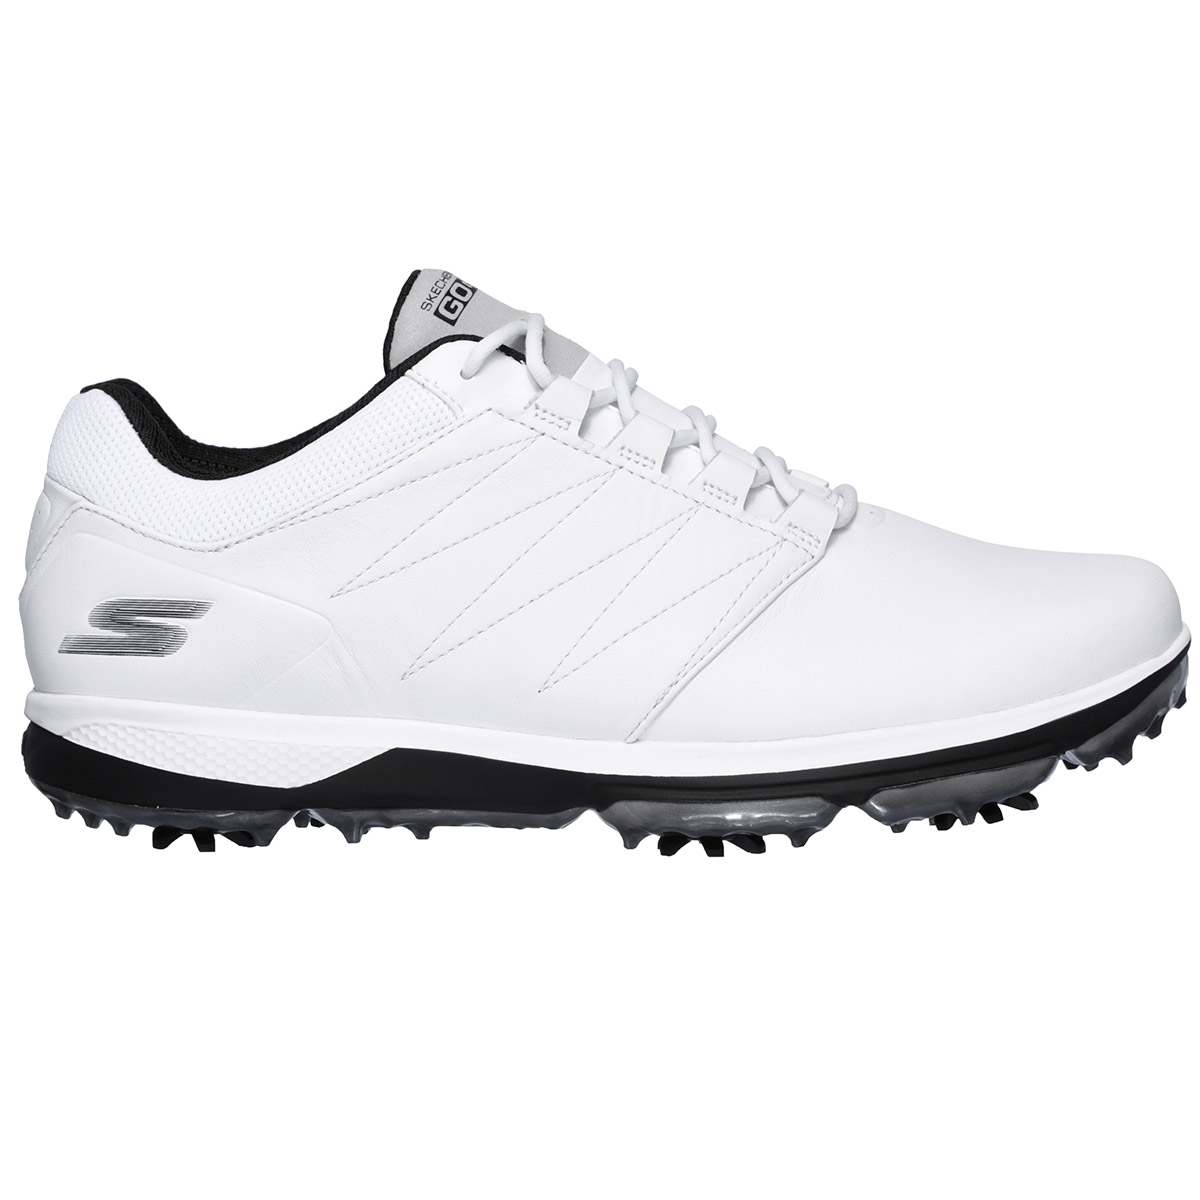 Skechers Go Golf Pro 4 Shoes from american golf